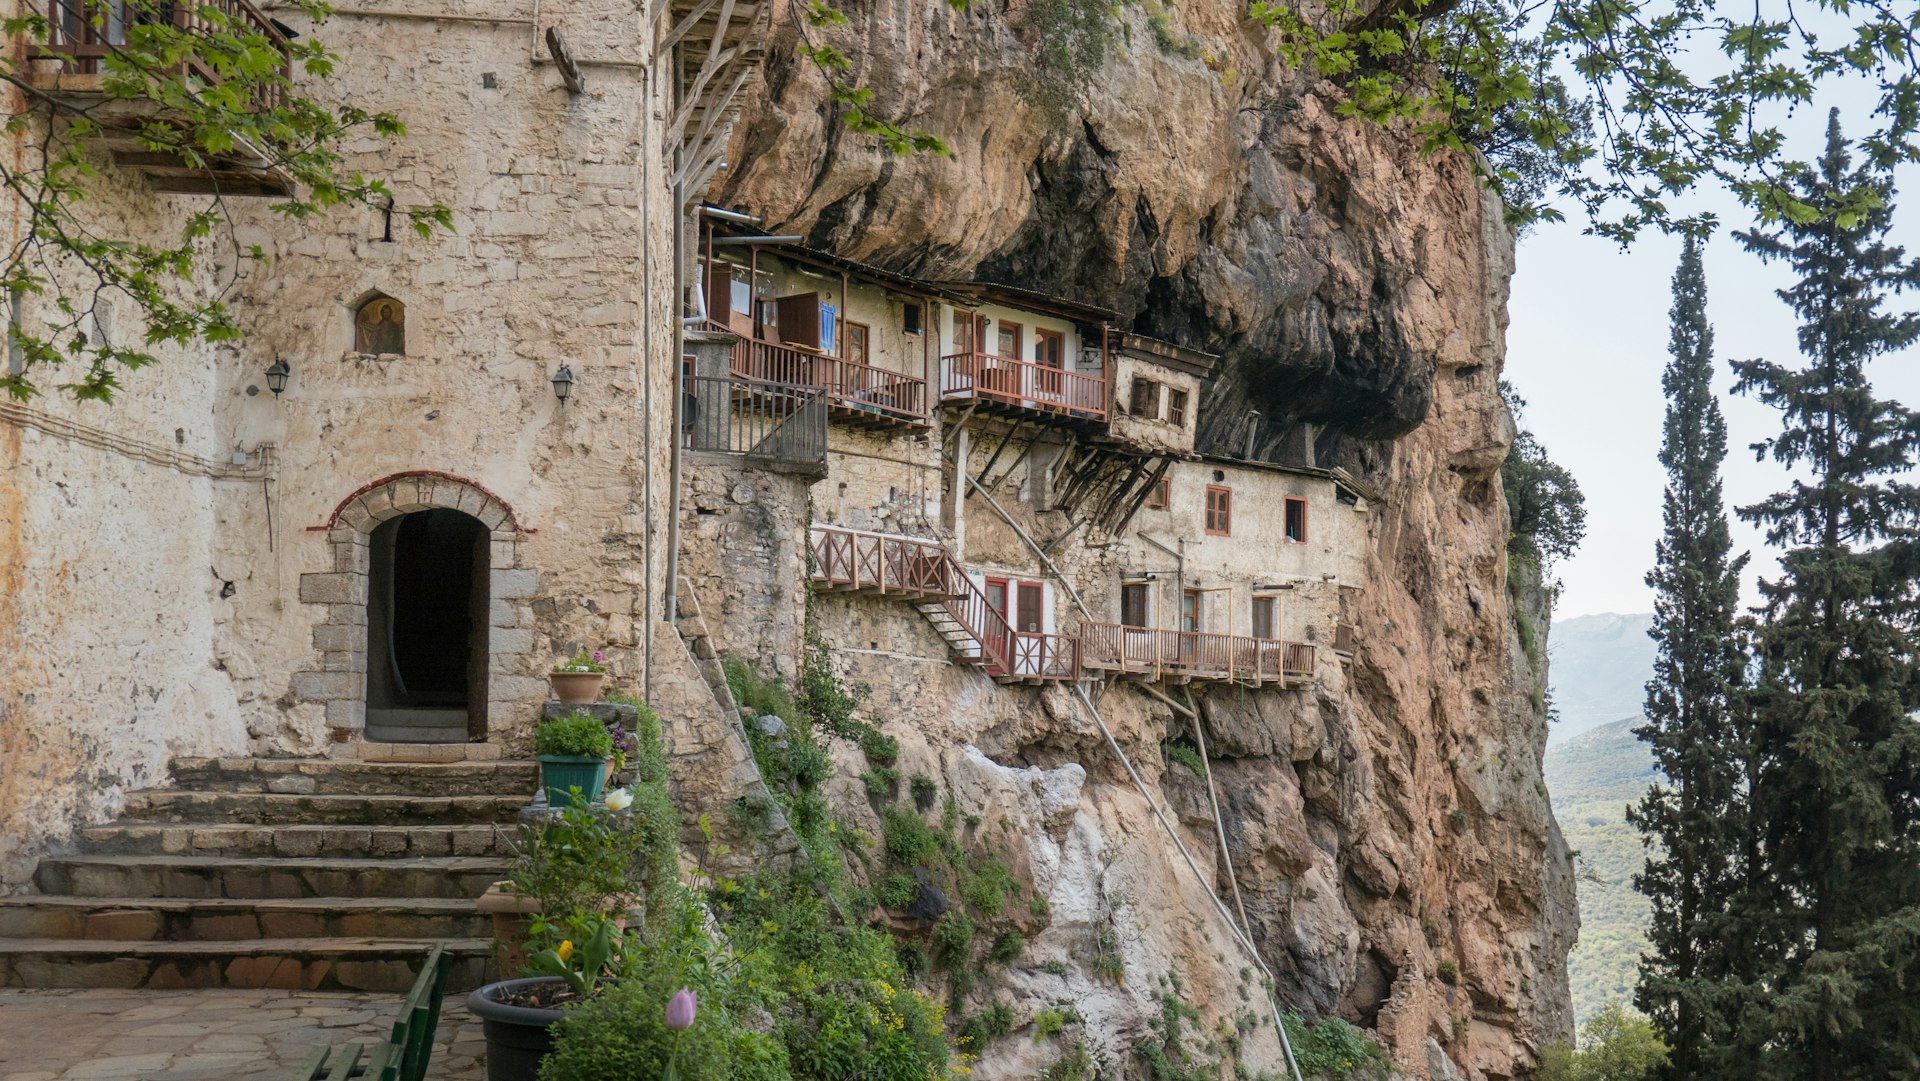 The Prodromou Monastery at Lousios Gorge is carved into the side of rock 